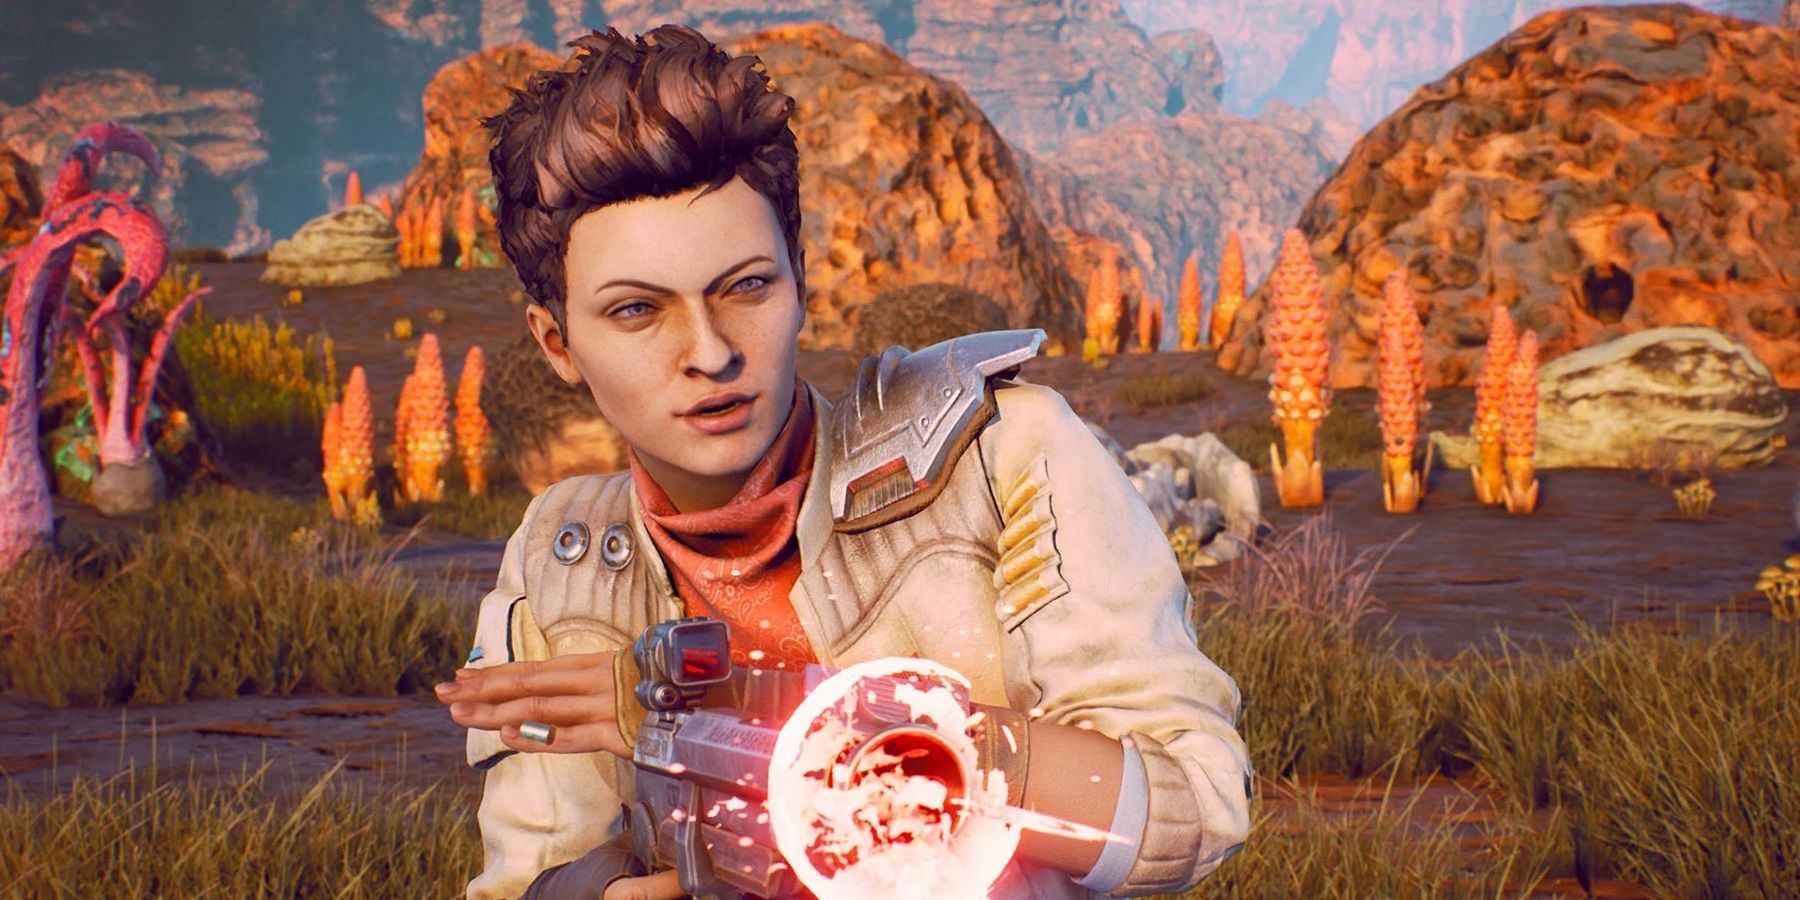 I Played The Outer Worlds Spacers Choice Edition So You Don't Have